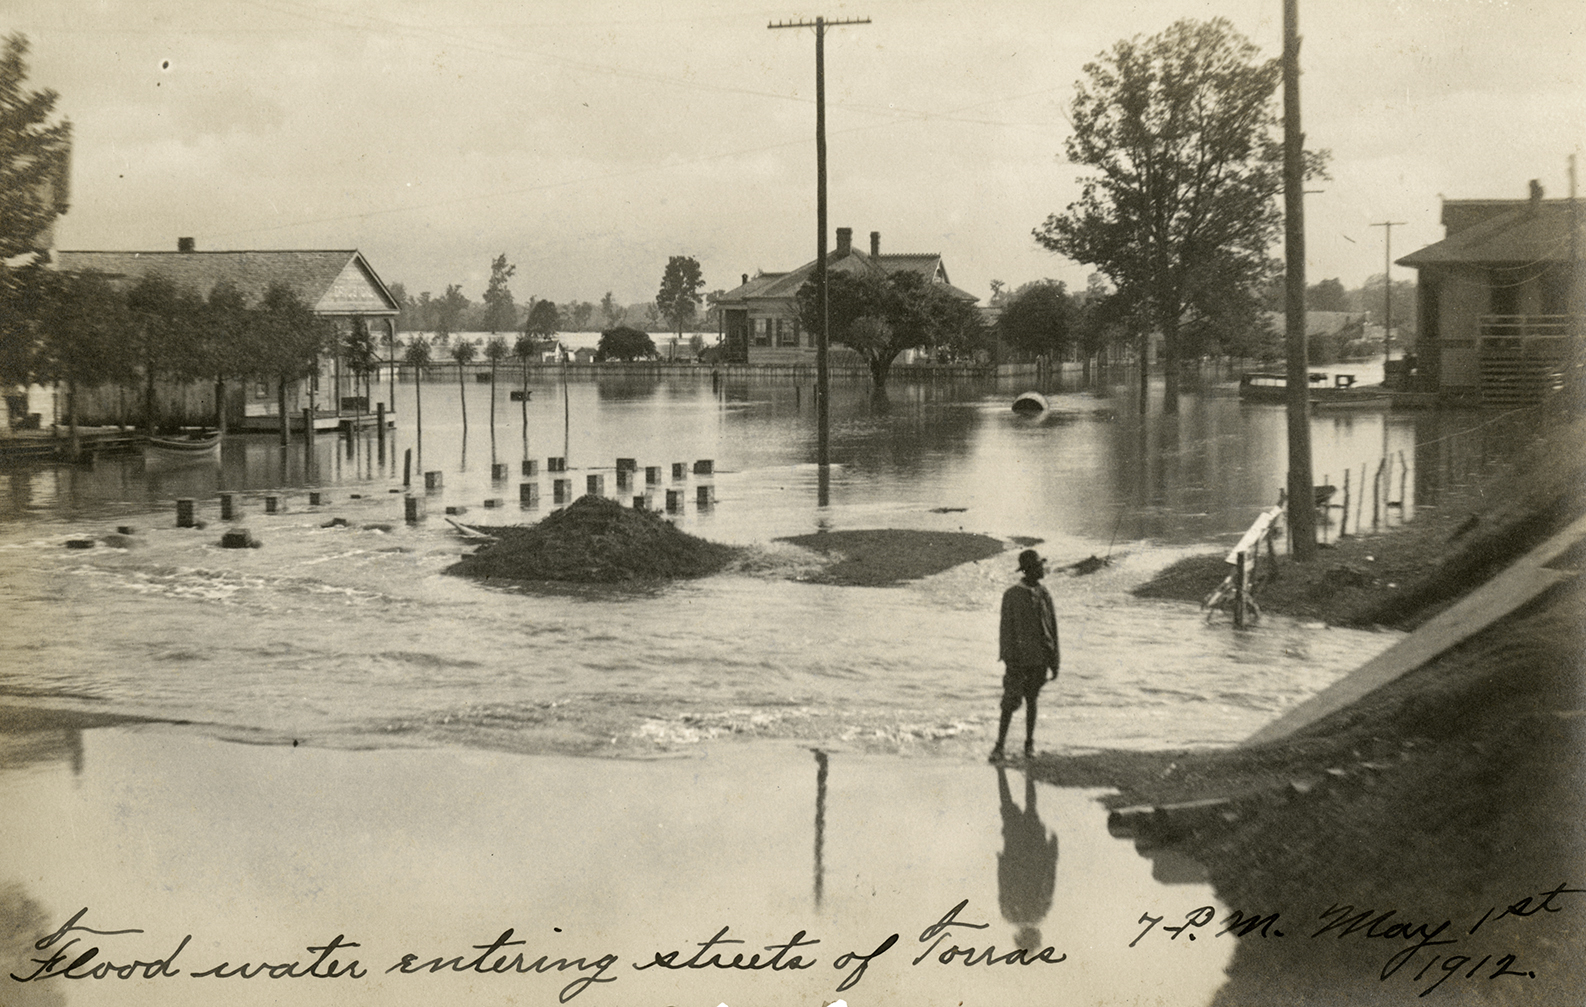 Flooding in Torras, La., c. 1912 (William Whipple Papers, Mss. 1899)